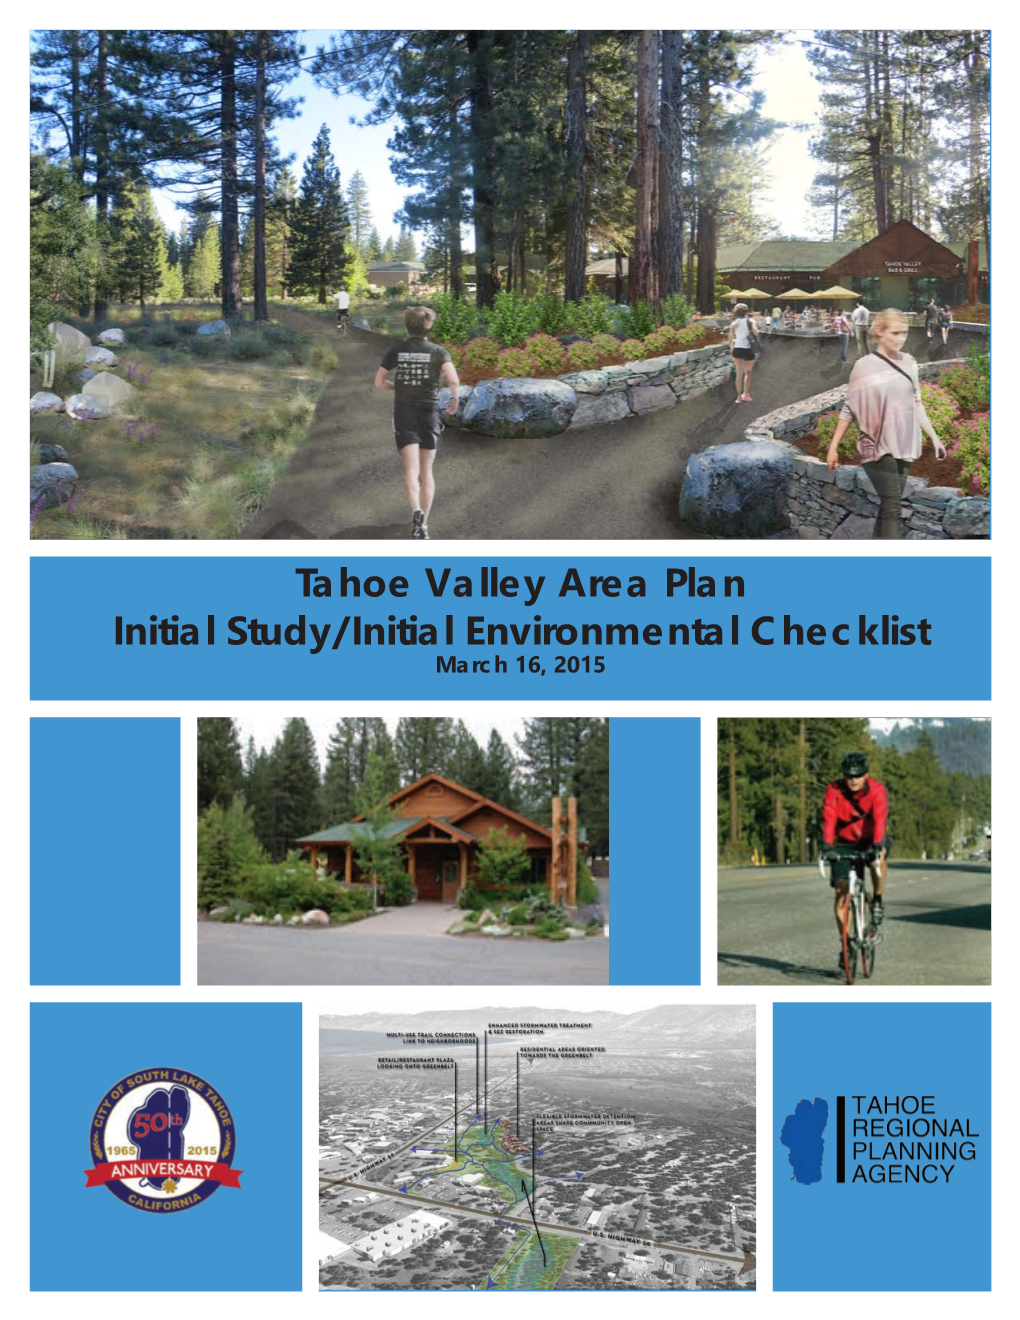 Tahoe Valley Area Plan Initial Study/Initial Environmental Checklist